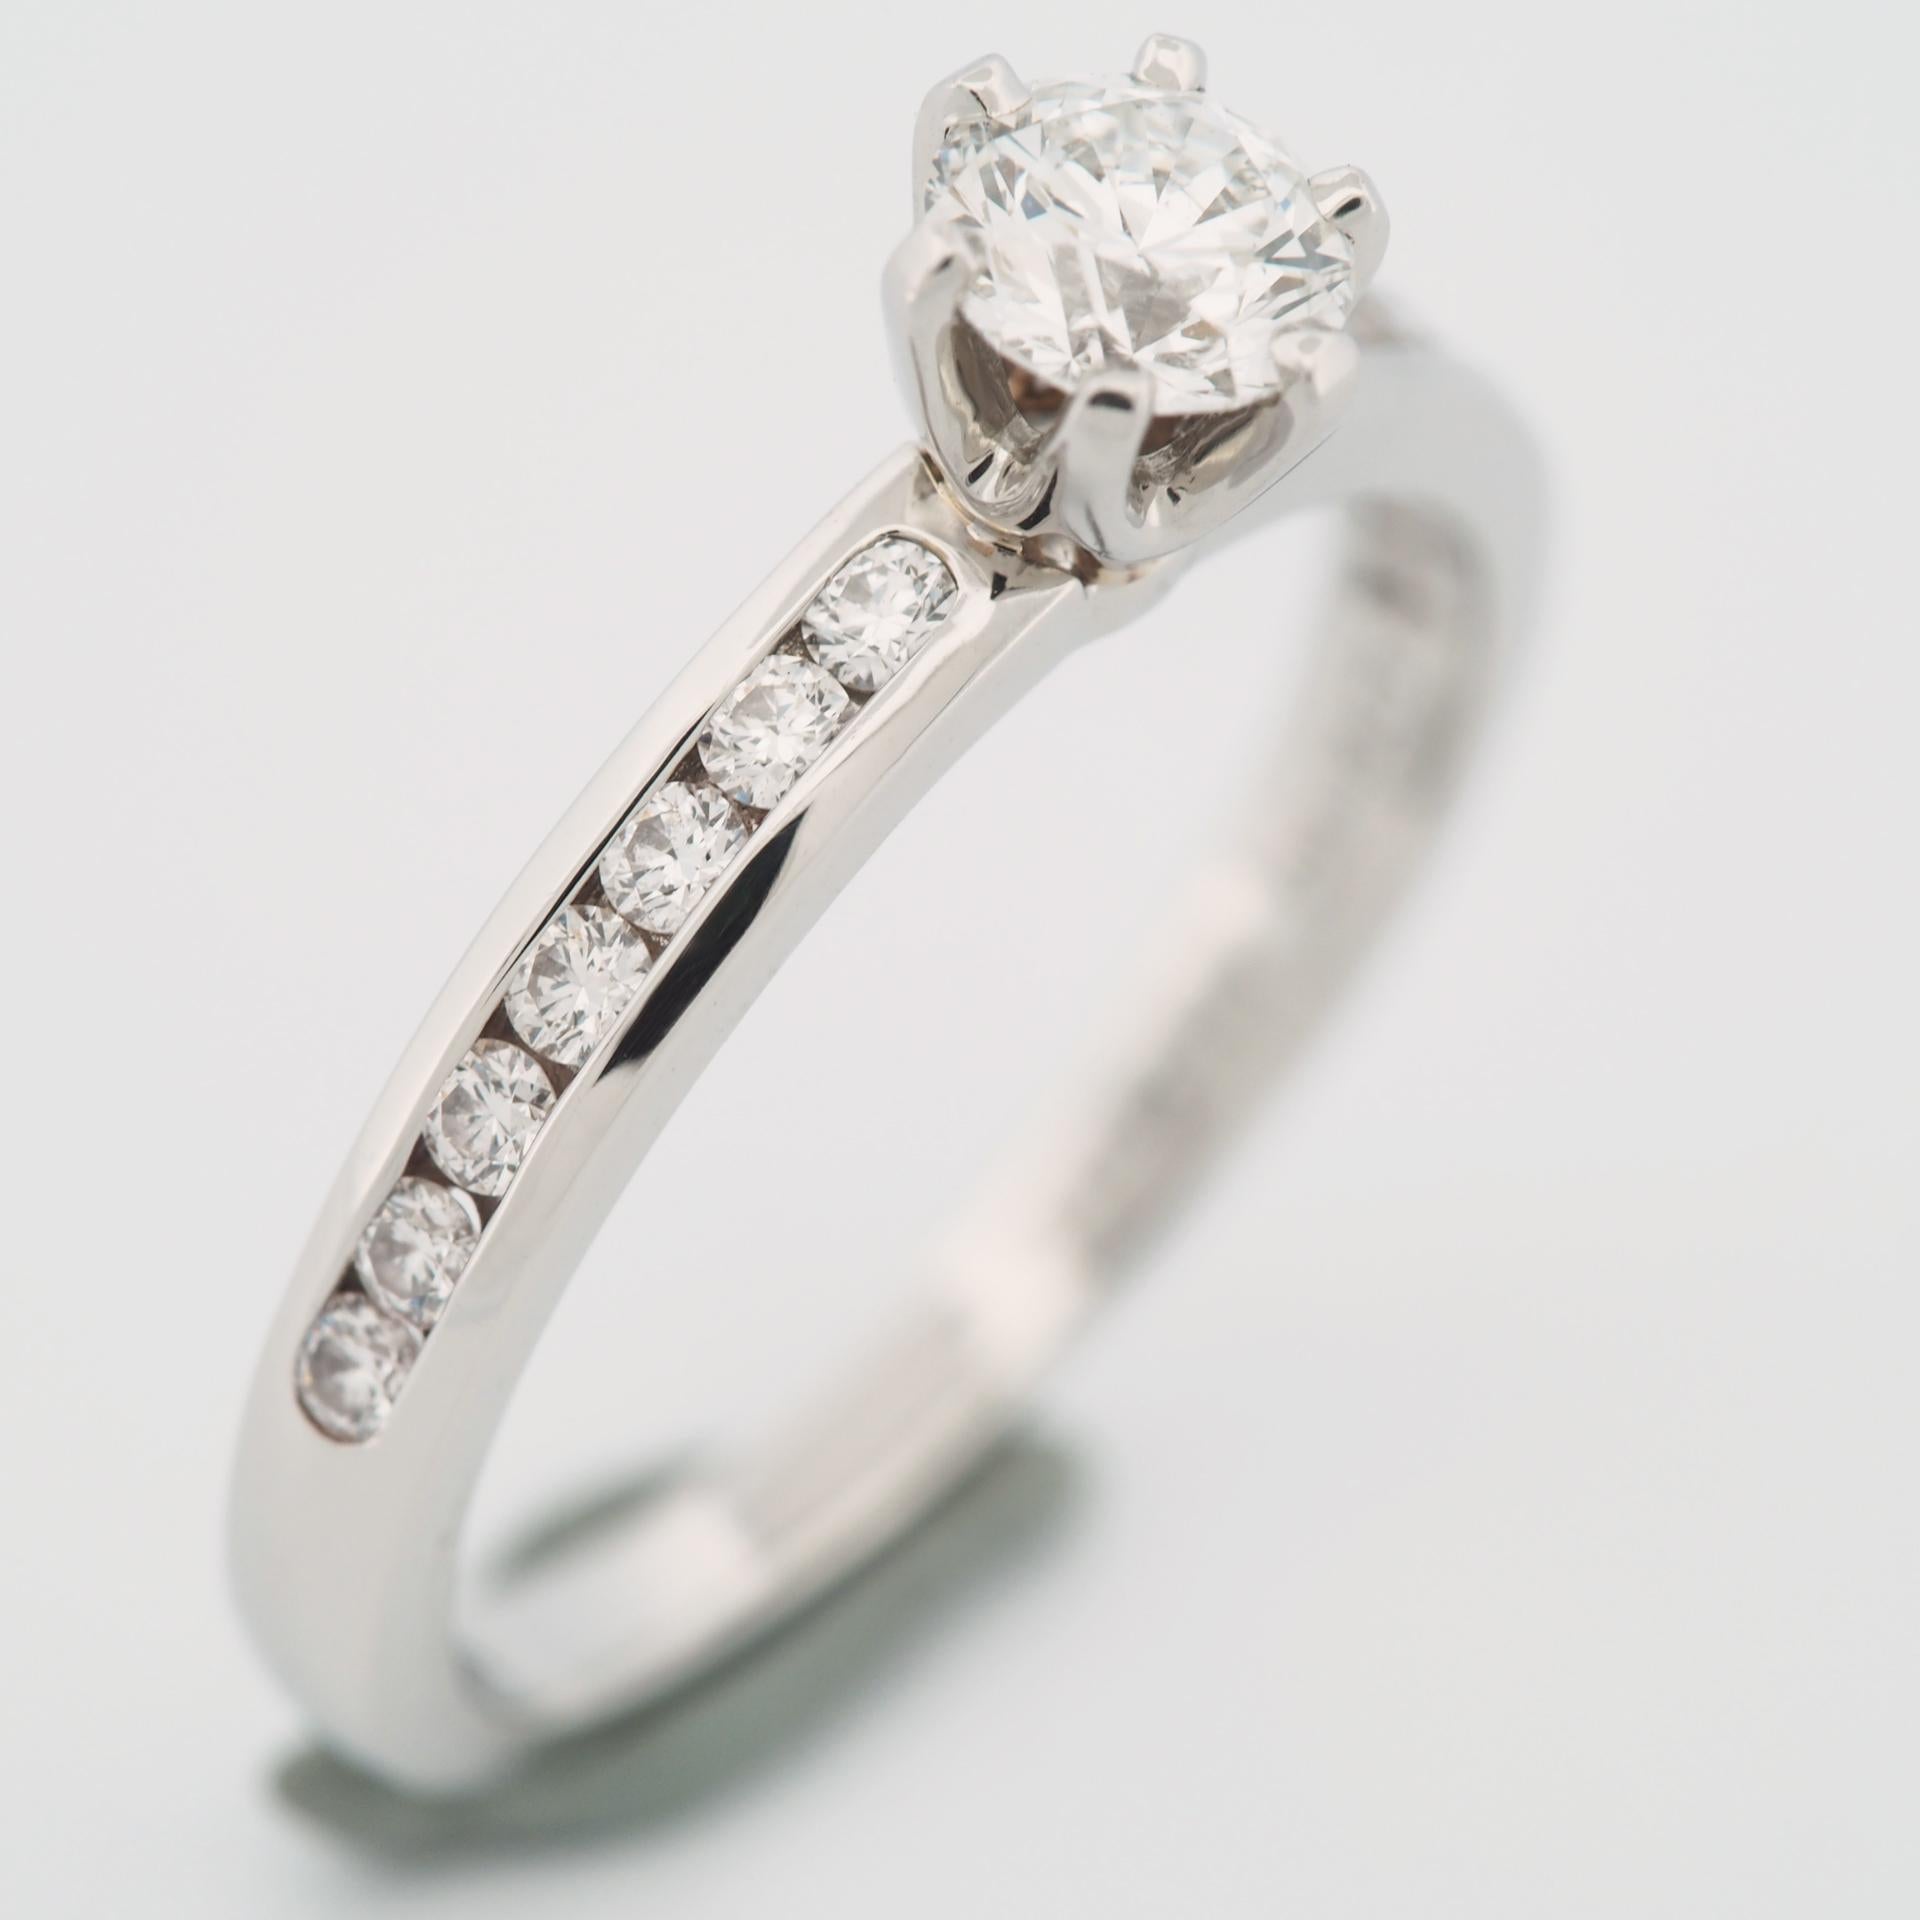 Tiffany 0.38 Carat Solitaire Diamond Ring PT950 with Channel Set Diamonds For Sale 2